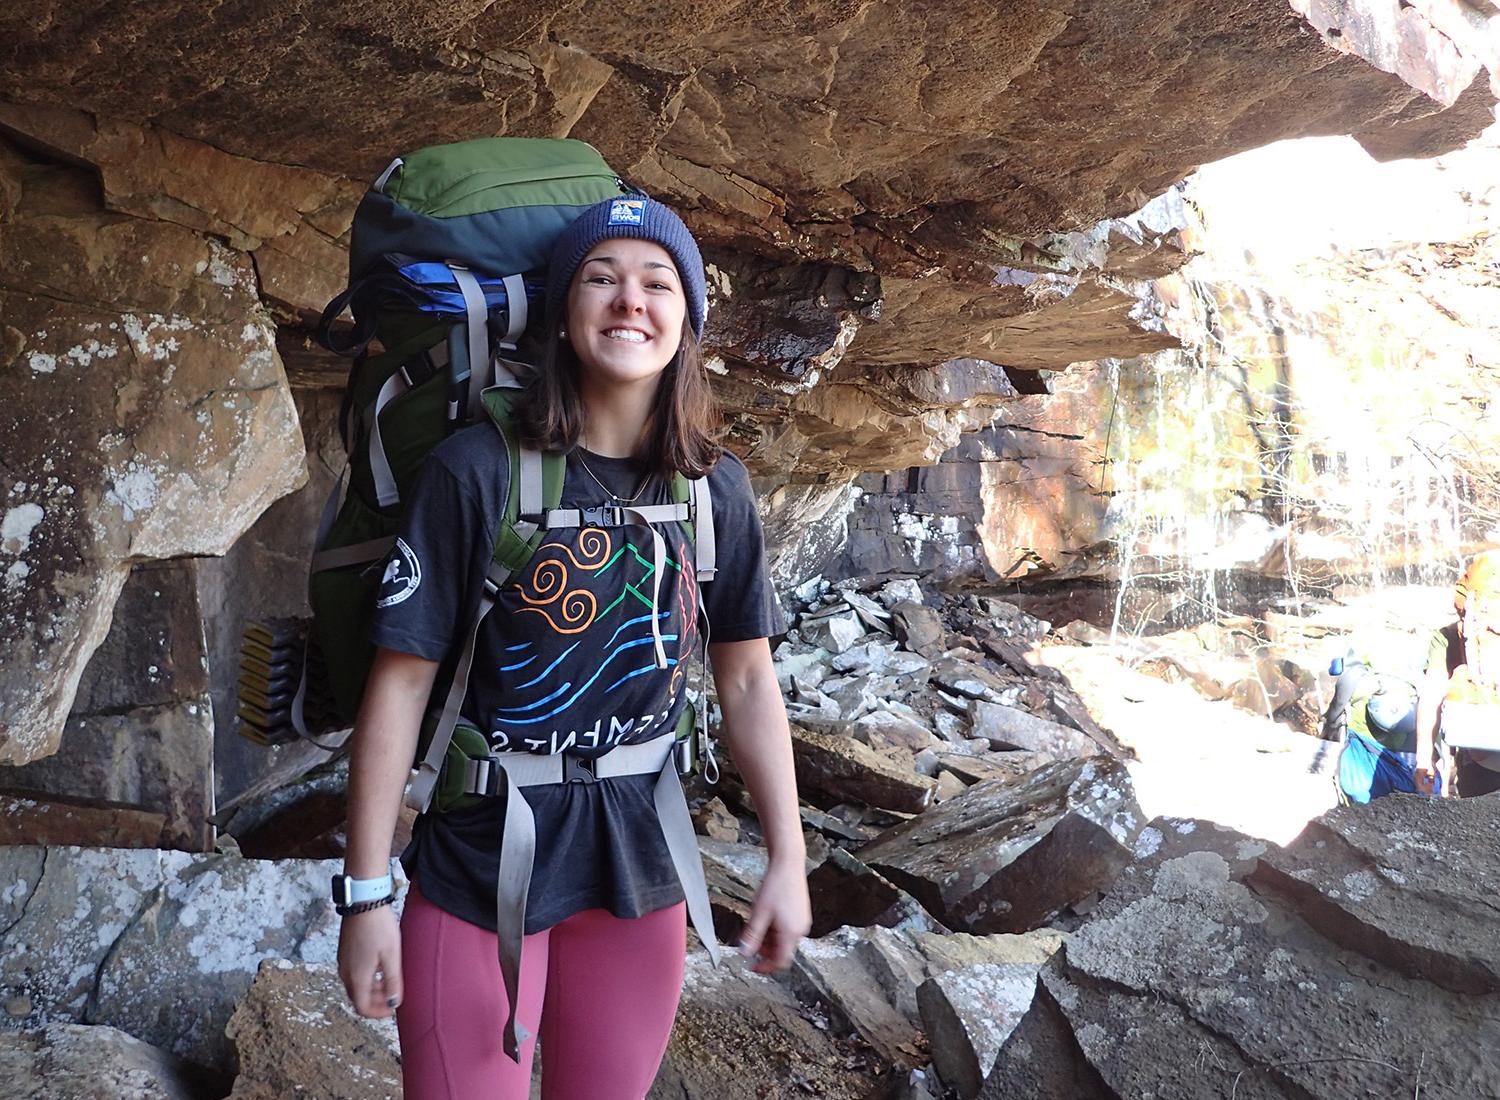 Student on backpacking trip